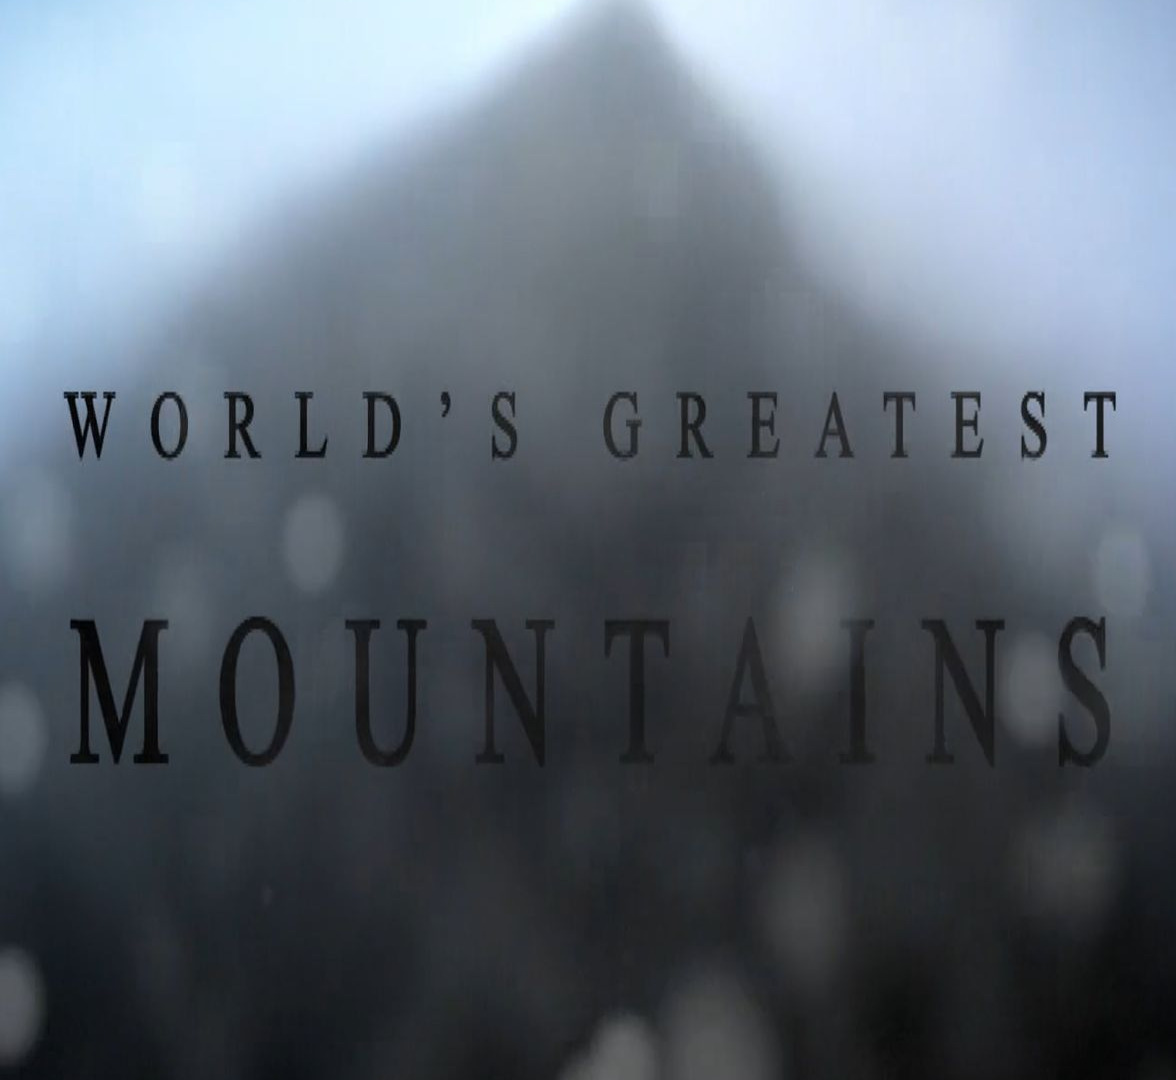 Show Secrets of the World's Greatest Mountains